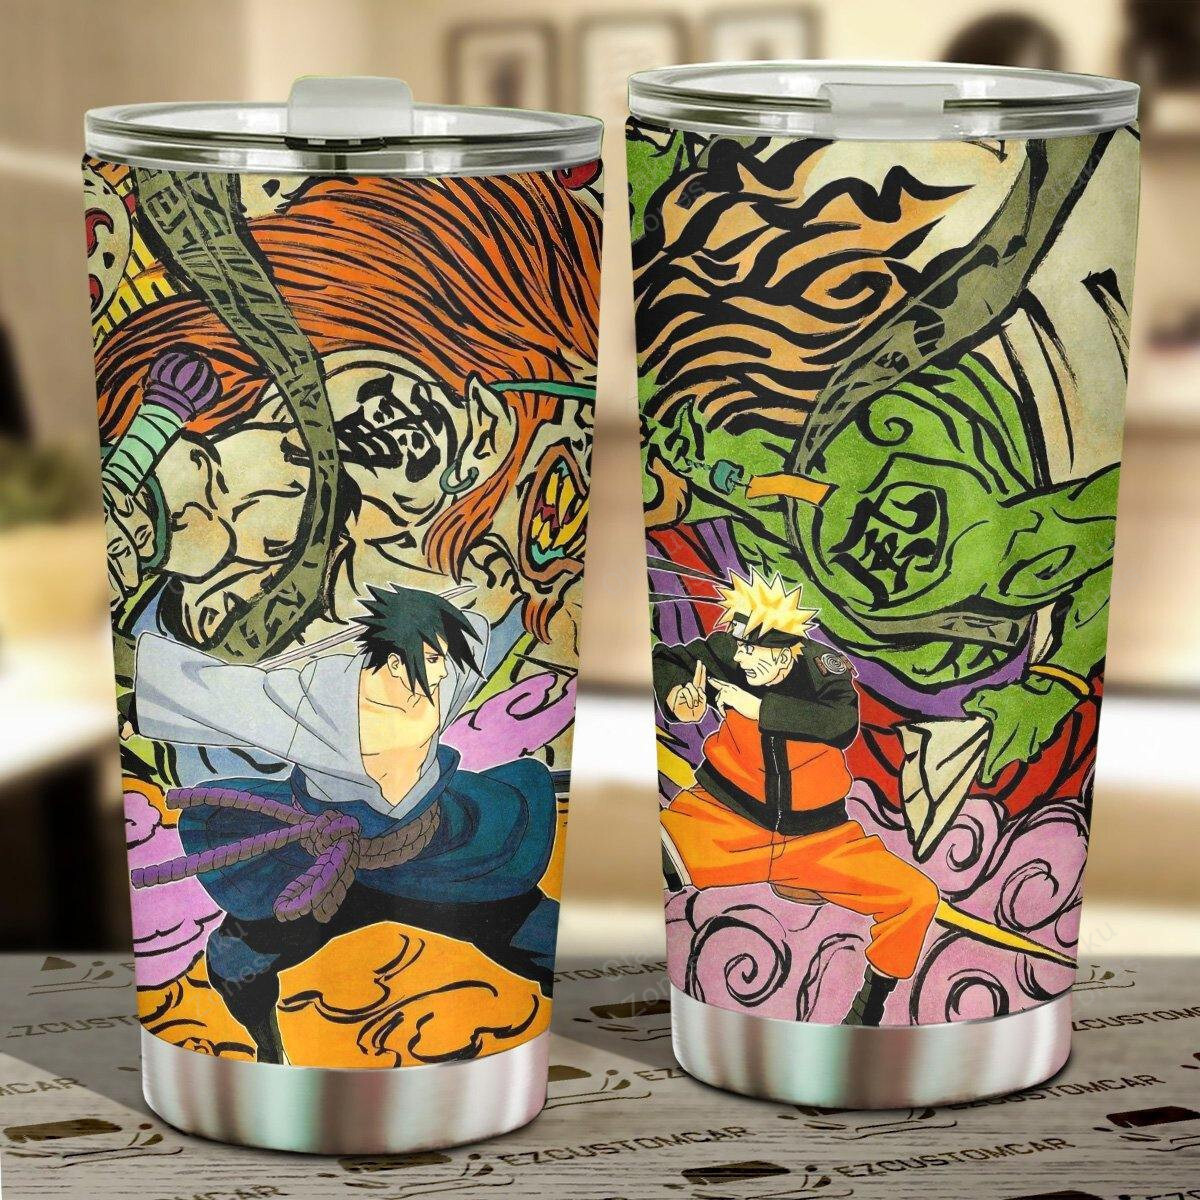 Go ahead and order your new tumbler now! 12